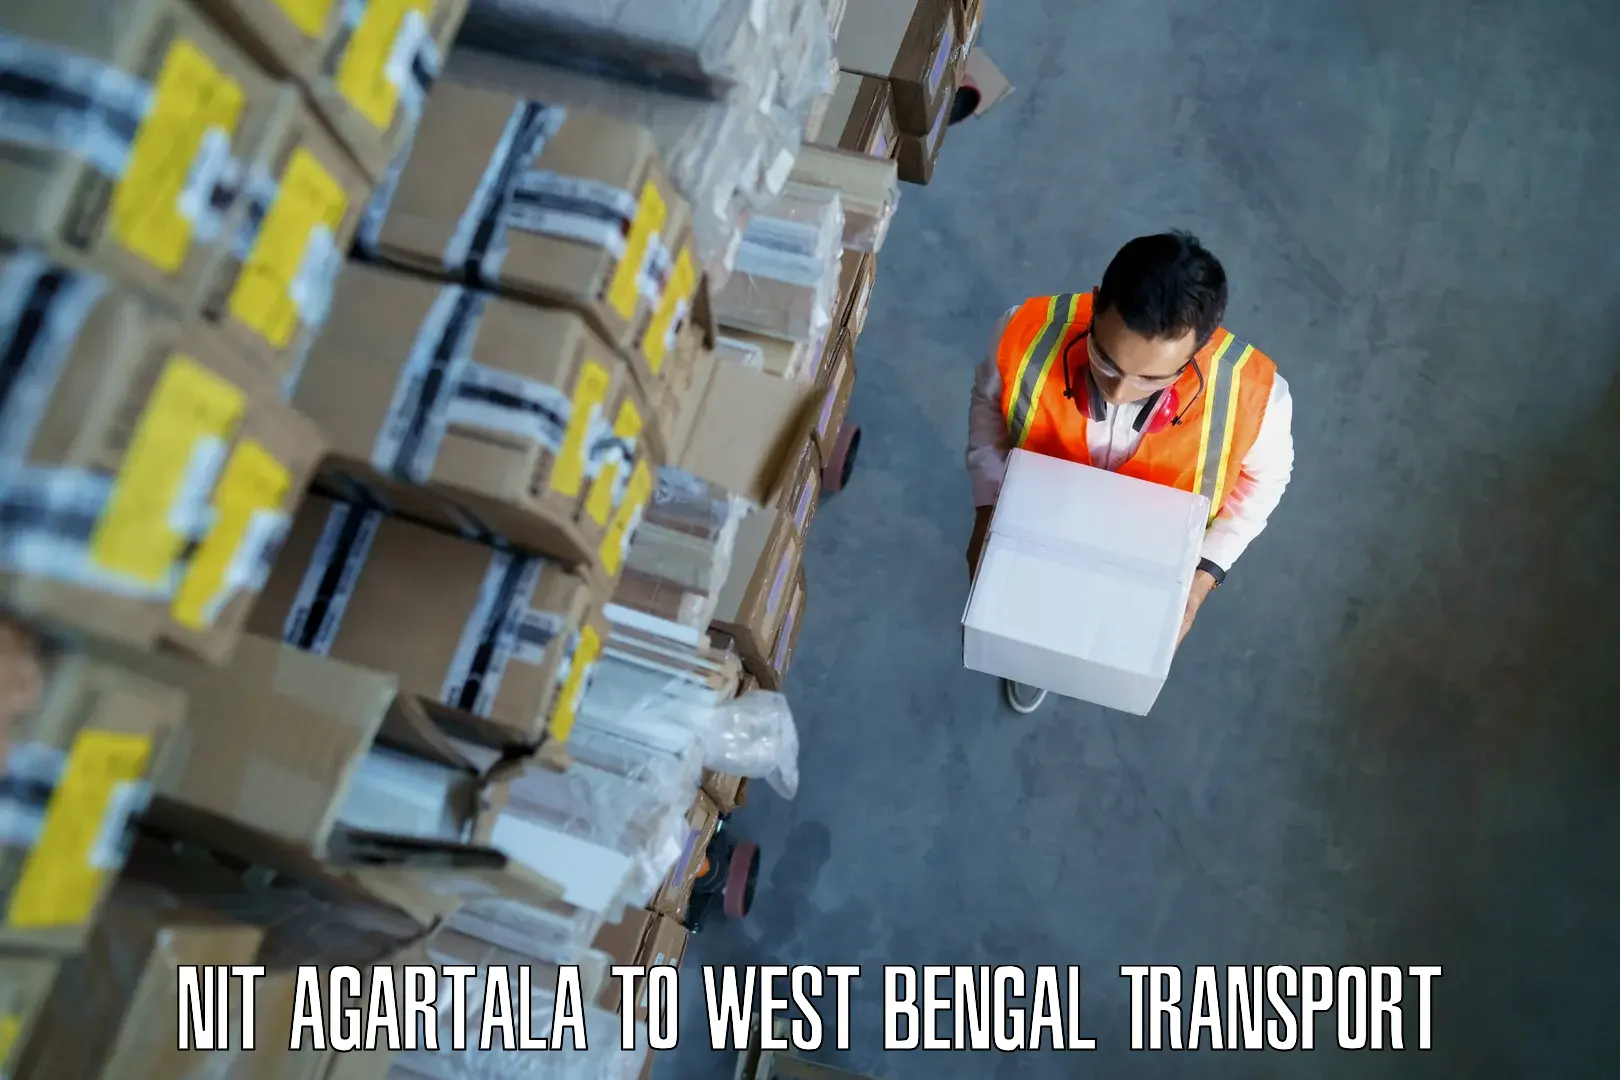 Daily parcel service transport in NIT Agartala to Baruipur